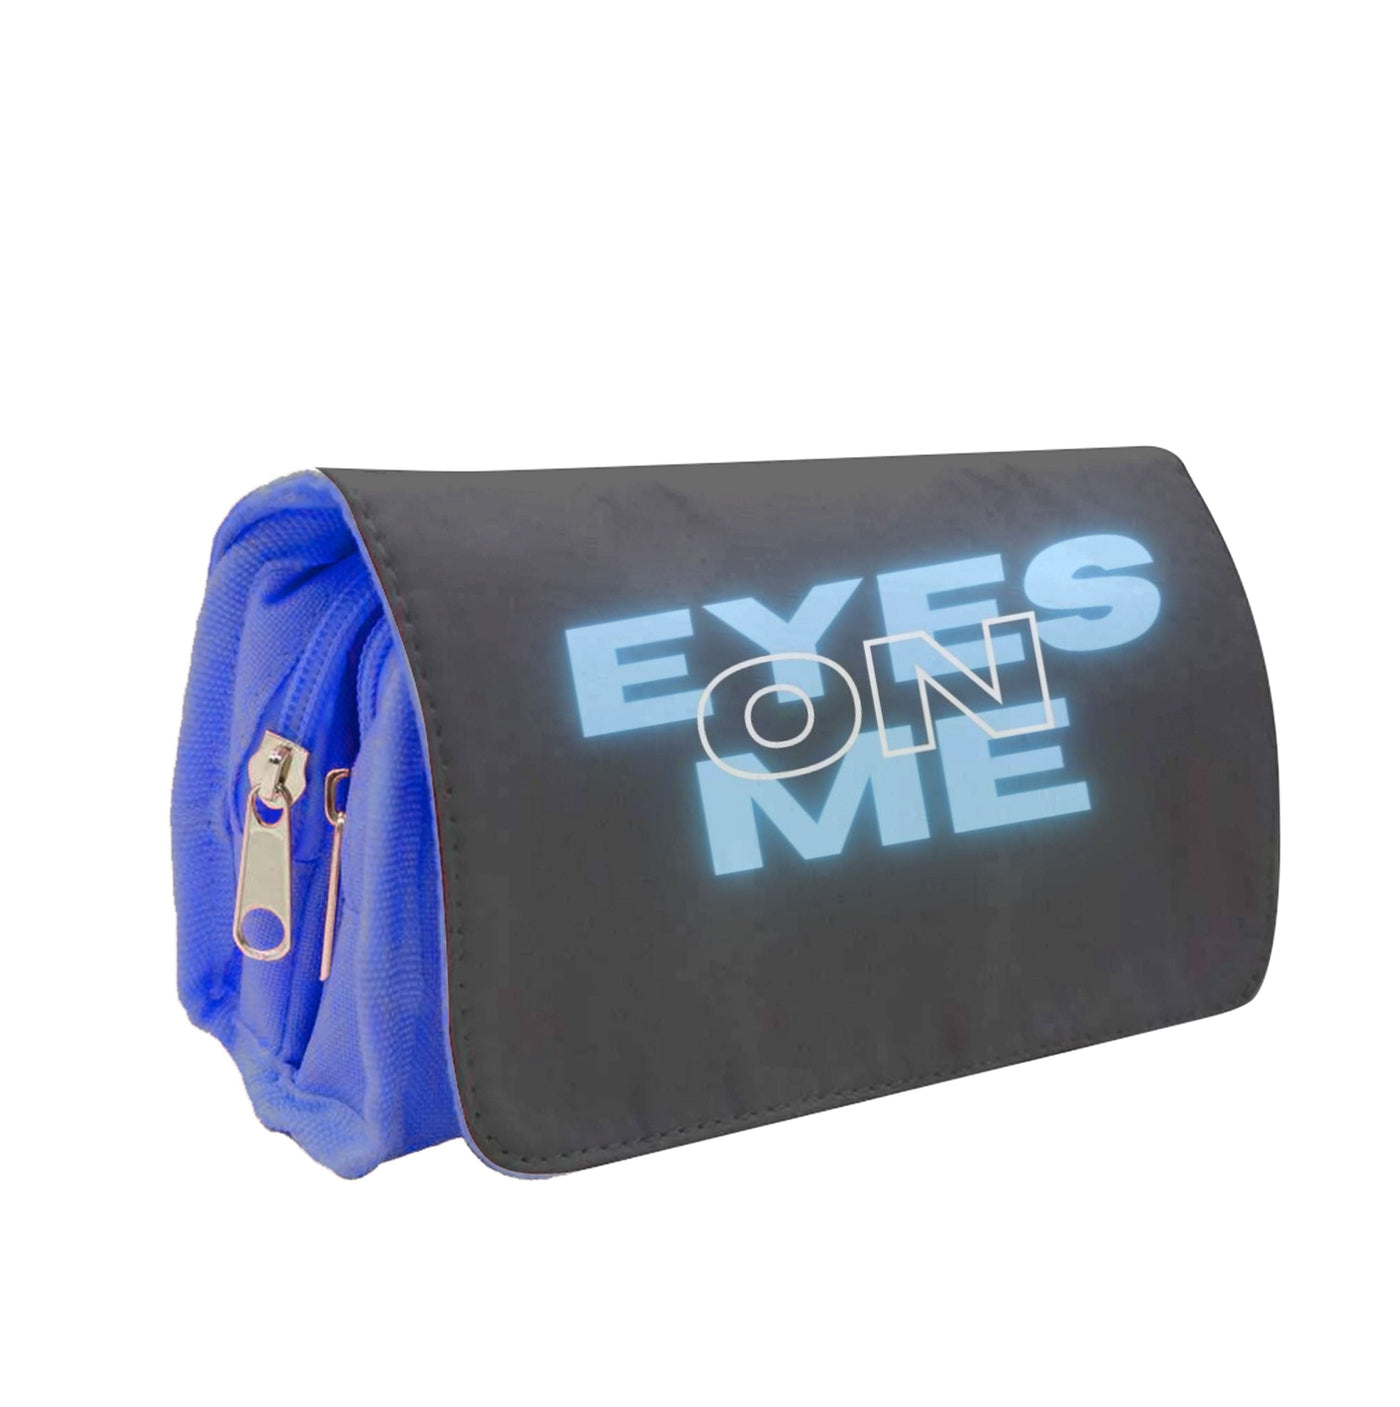 Eyes On Me - Sassy Quote Pencil Case